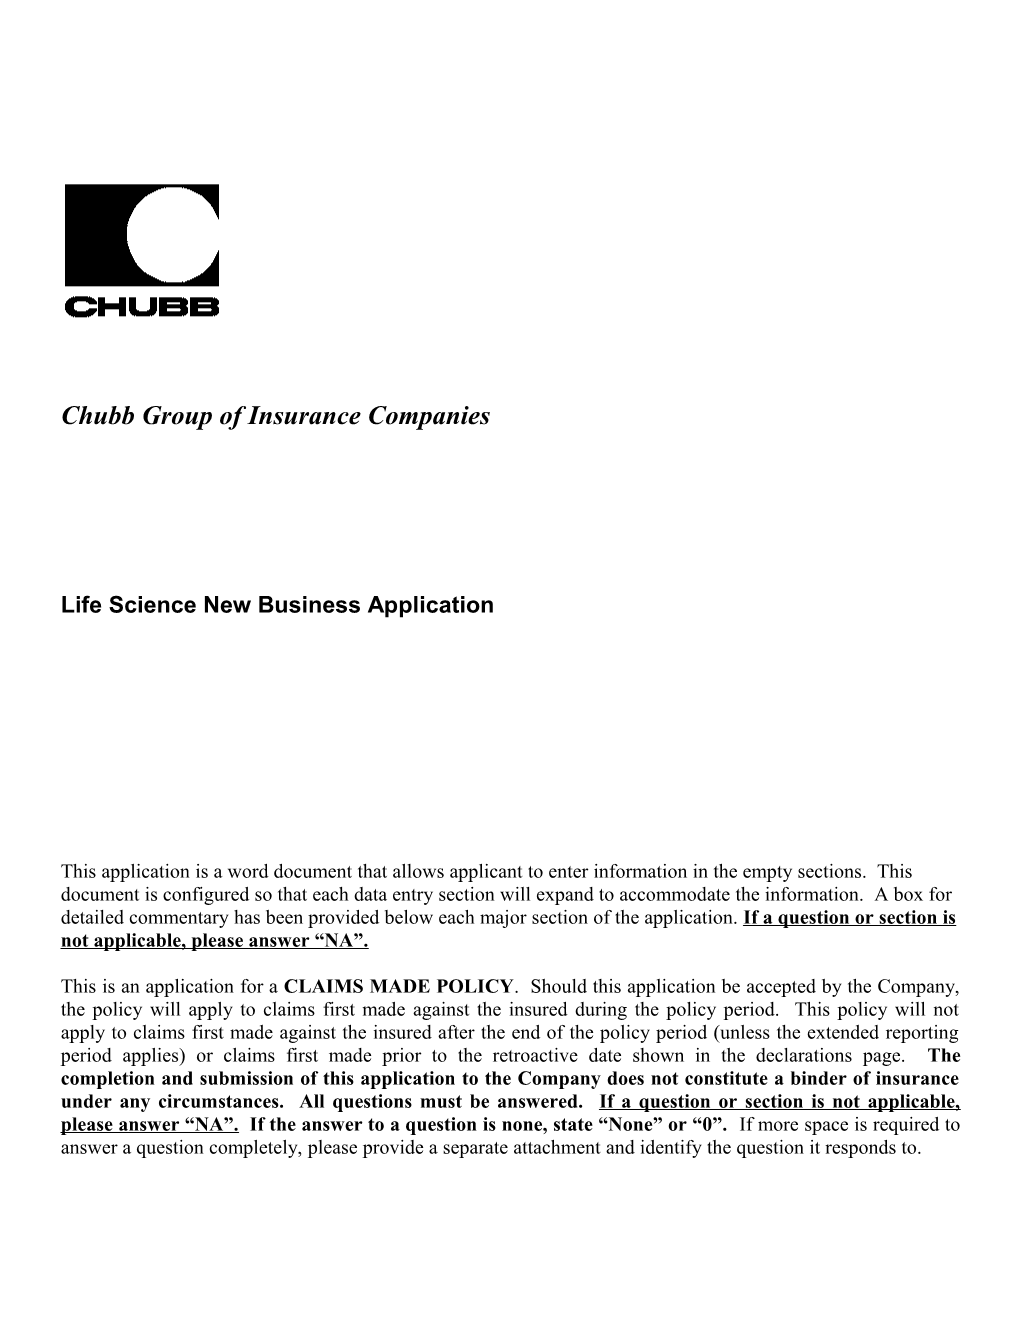 Chubb Life Science New Business Application